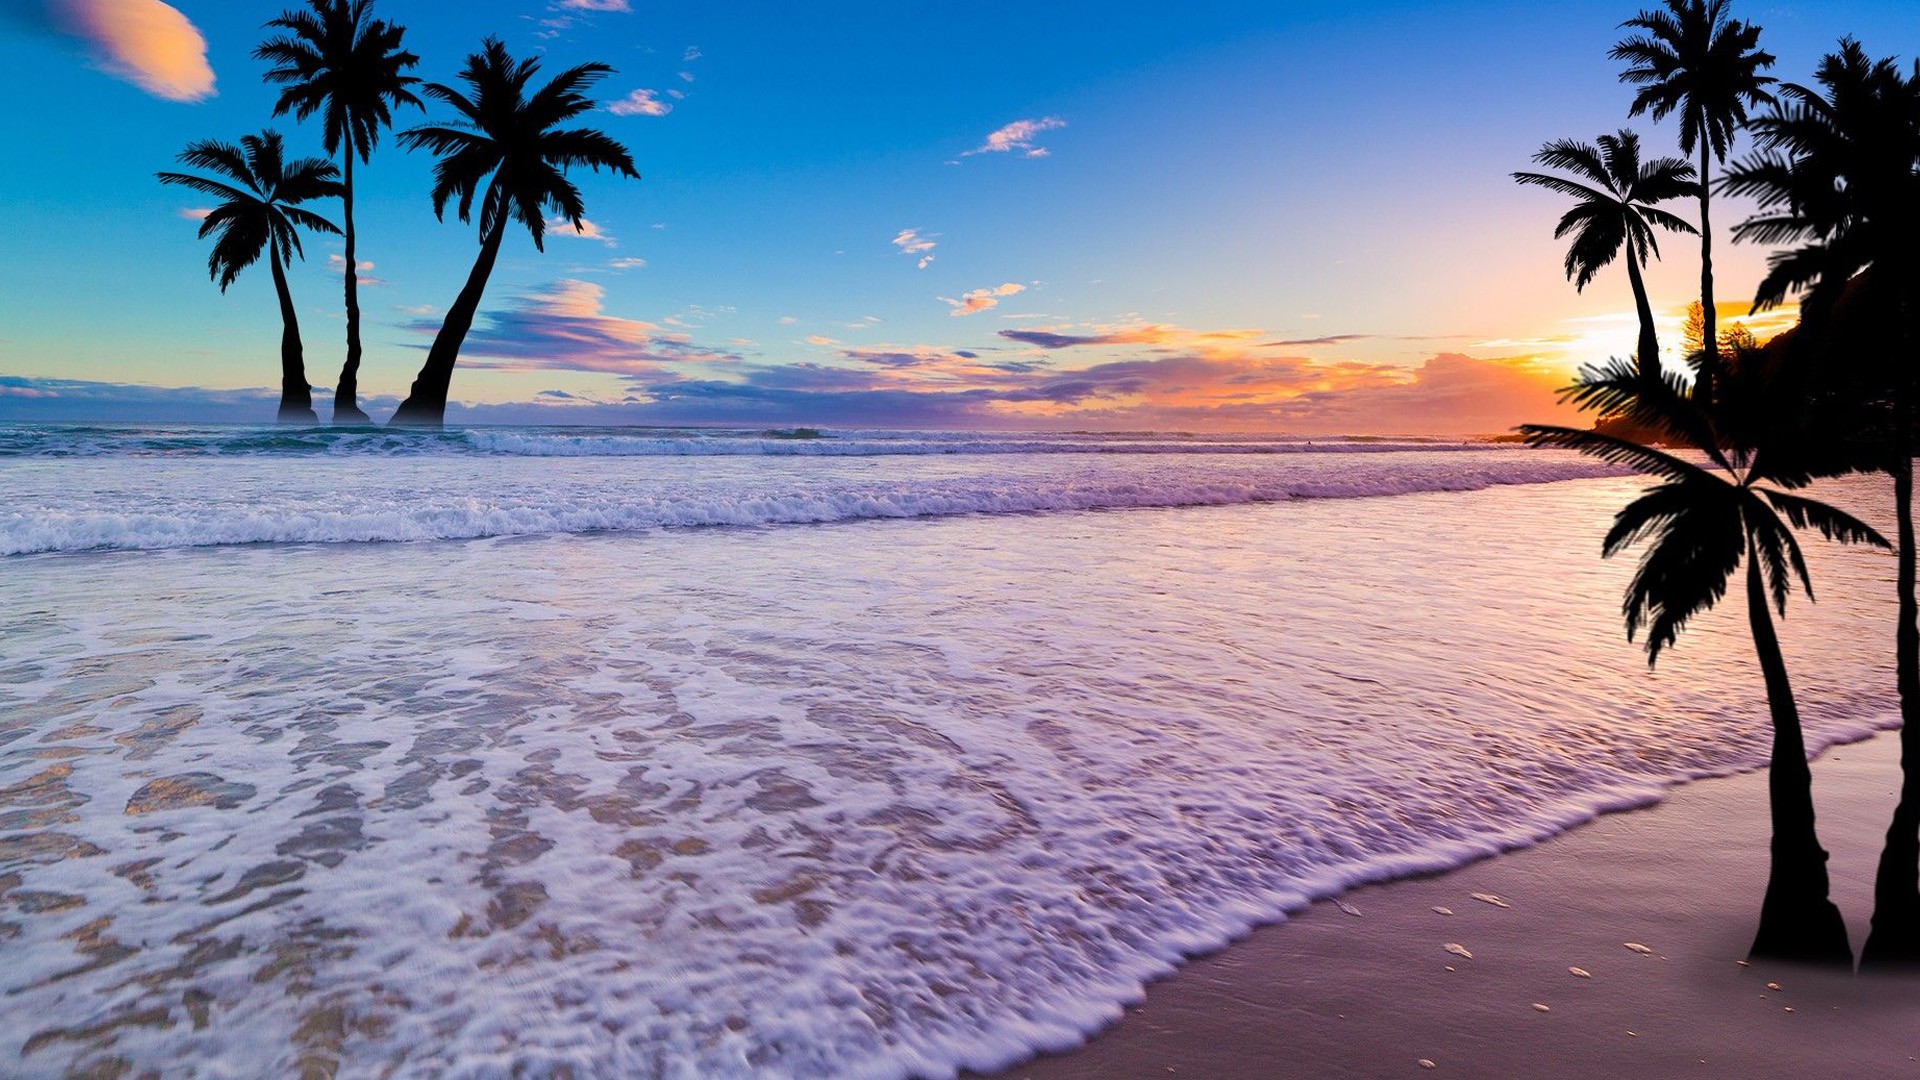 Sunset in the beach with palm trees Wallpaper Full HD ID:6908